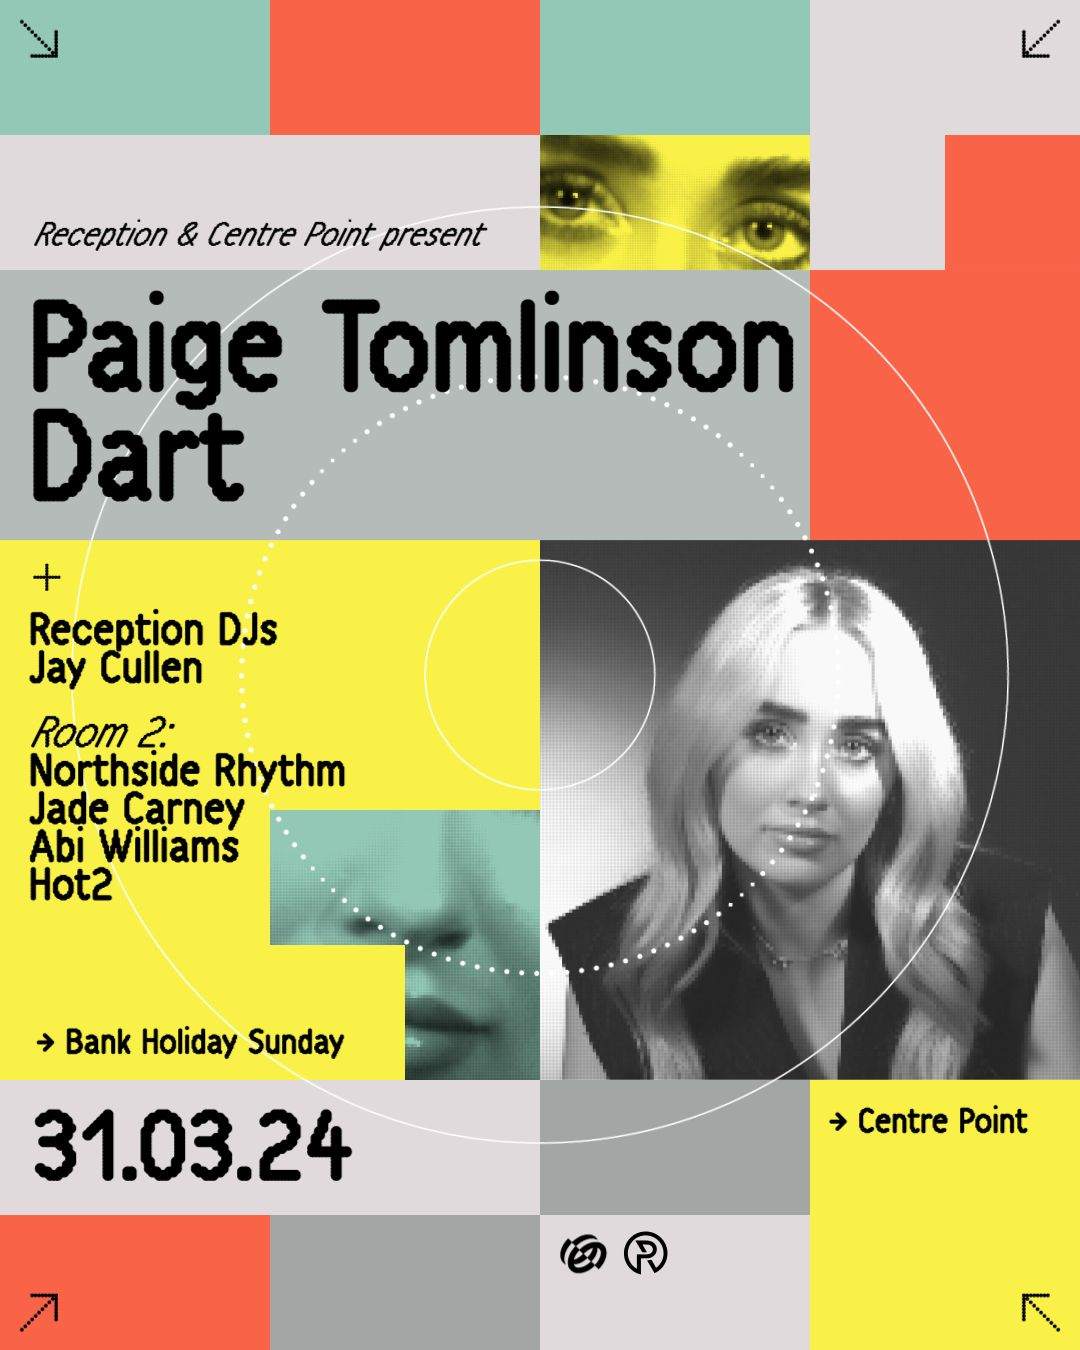 Easter Sunday with Paige Tomlinson, DART + more - Página frontal